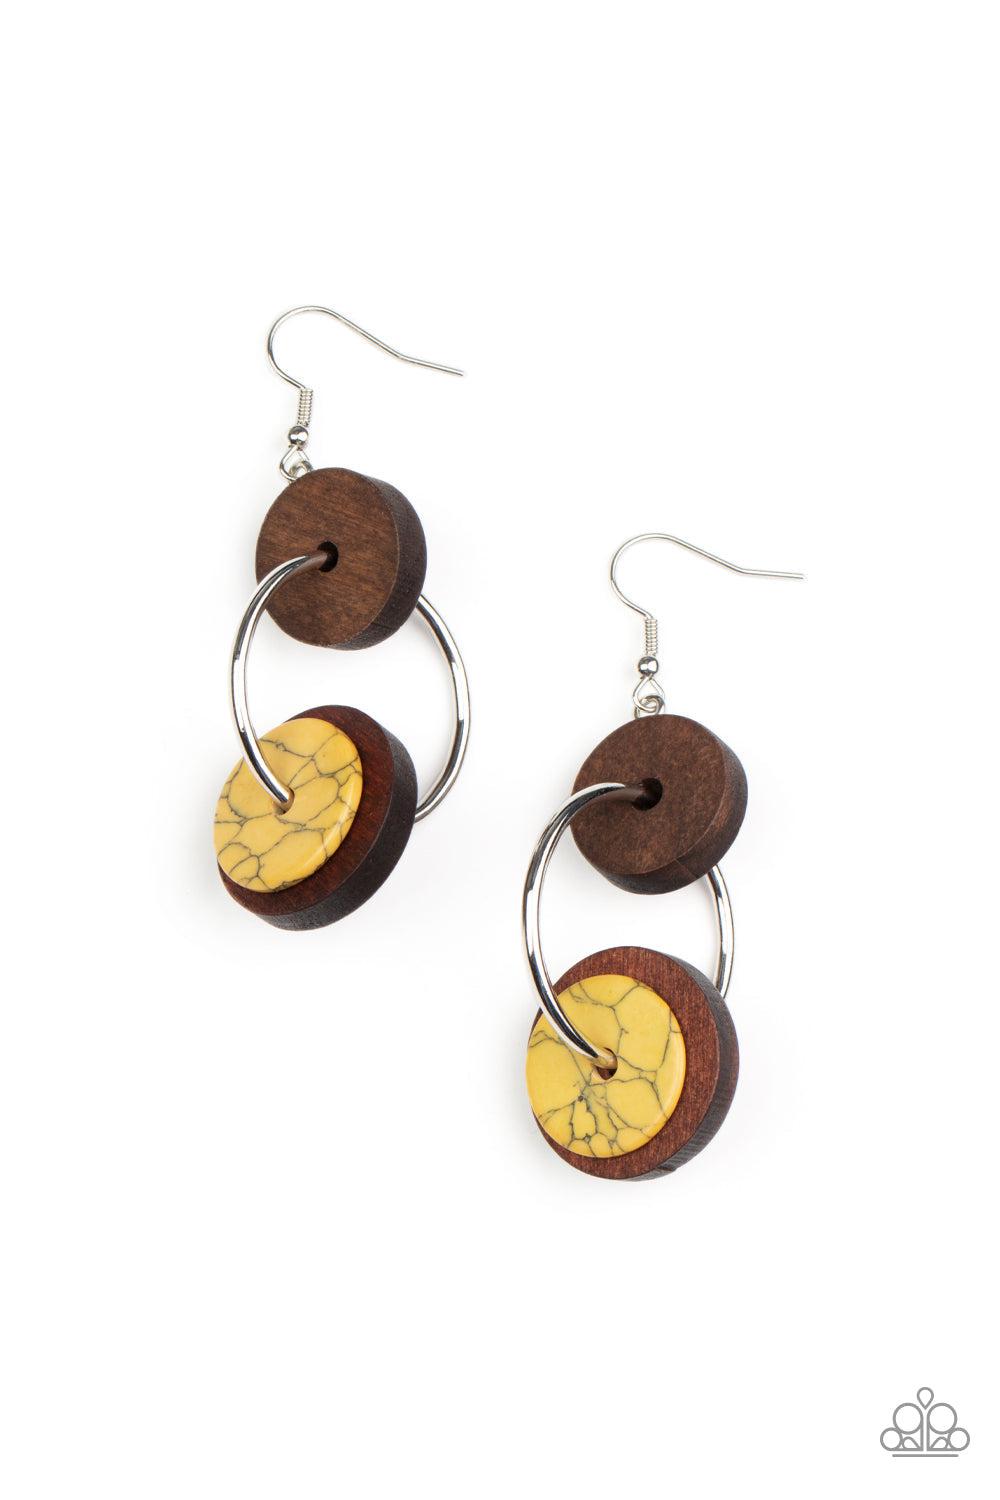 Artisanal Aesthetic Yellow Stone and Brown Wood Earrings - Paparazzi Accessories- lightbox - CarasShop.com - $5 Jewelry by Cara Jewels